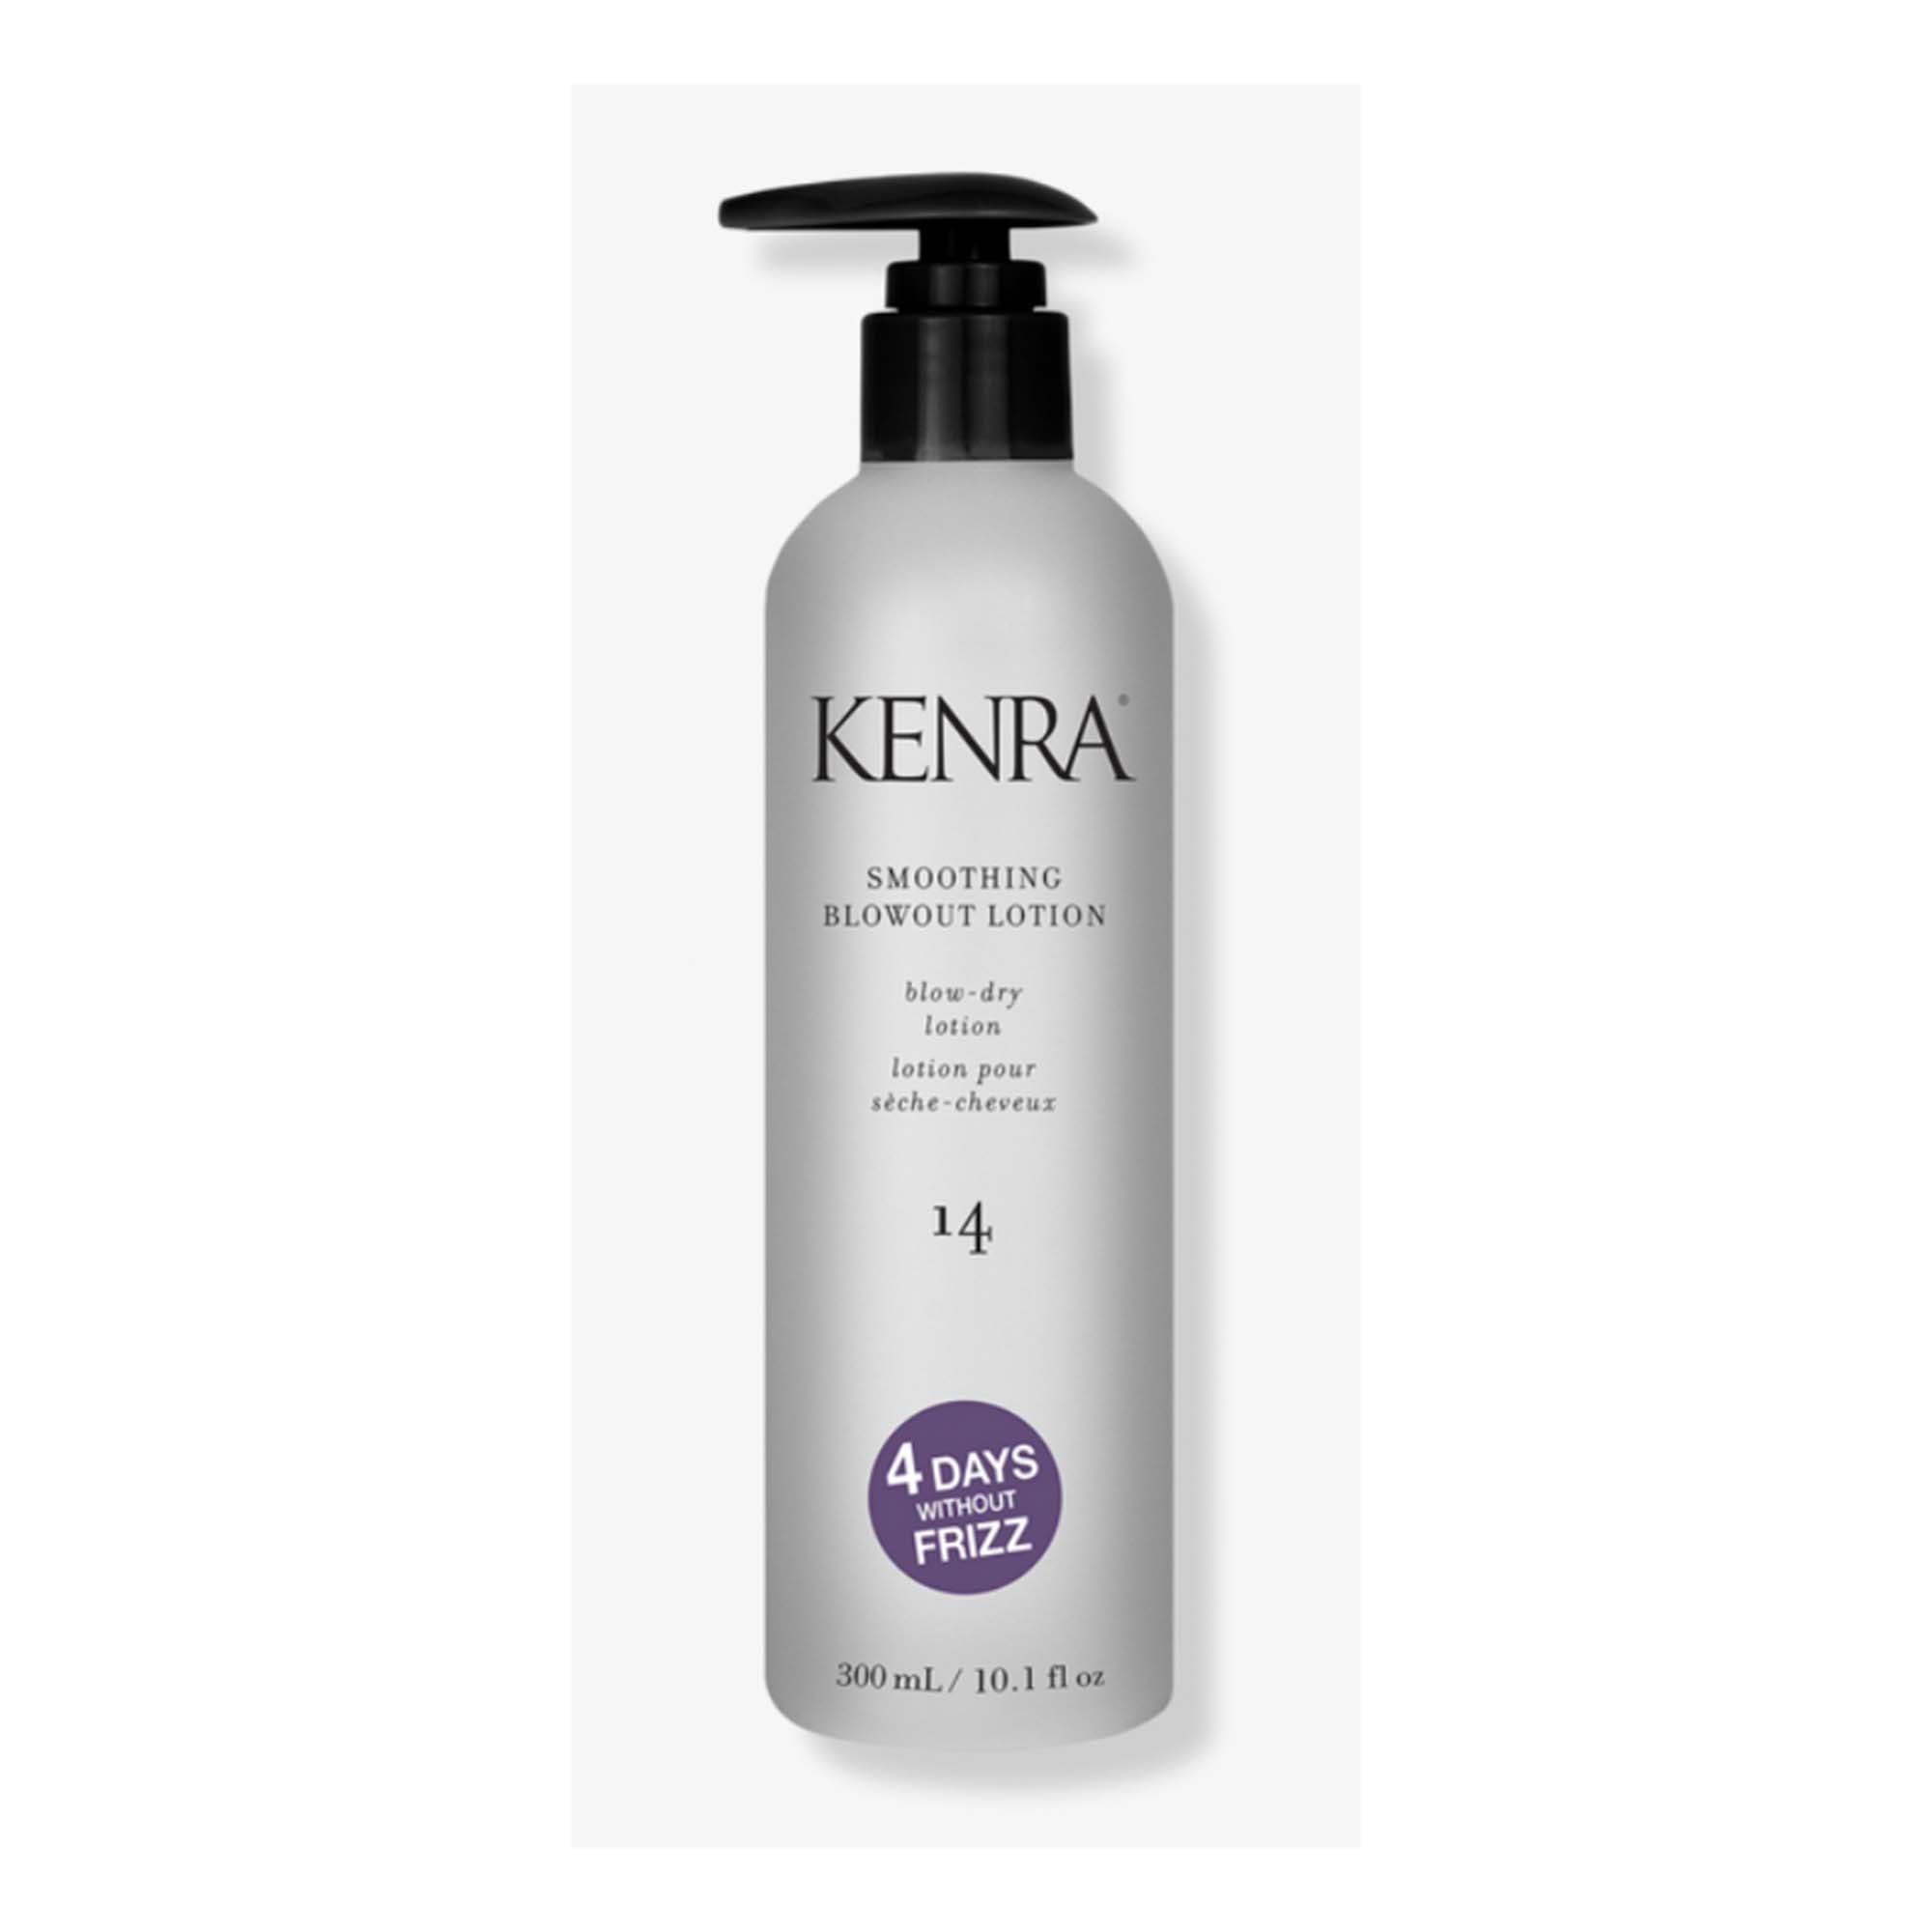 Kenra Smoothing Blowout Lotion 